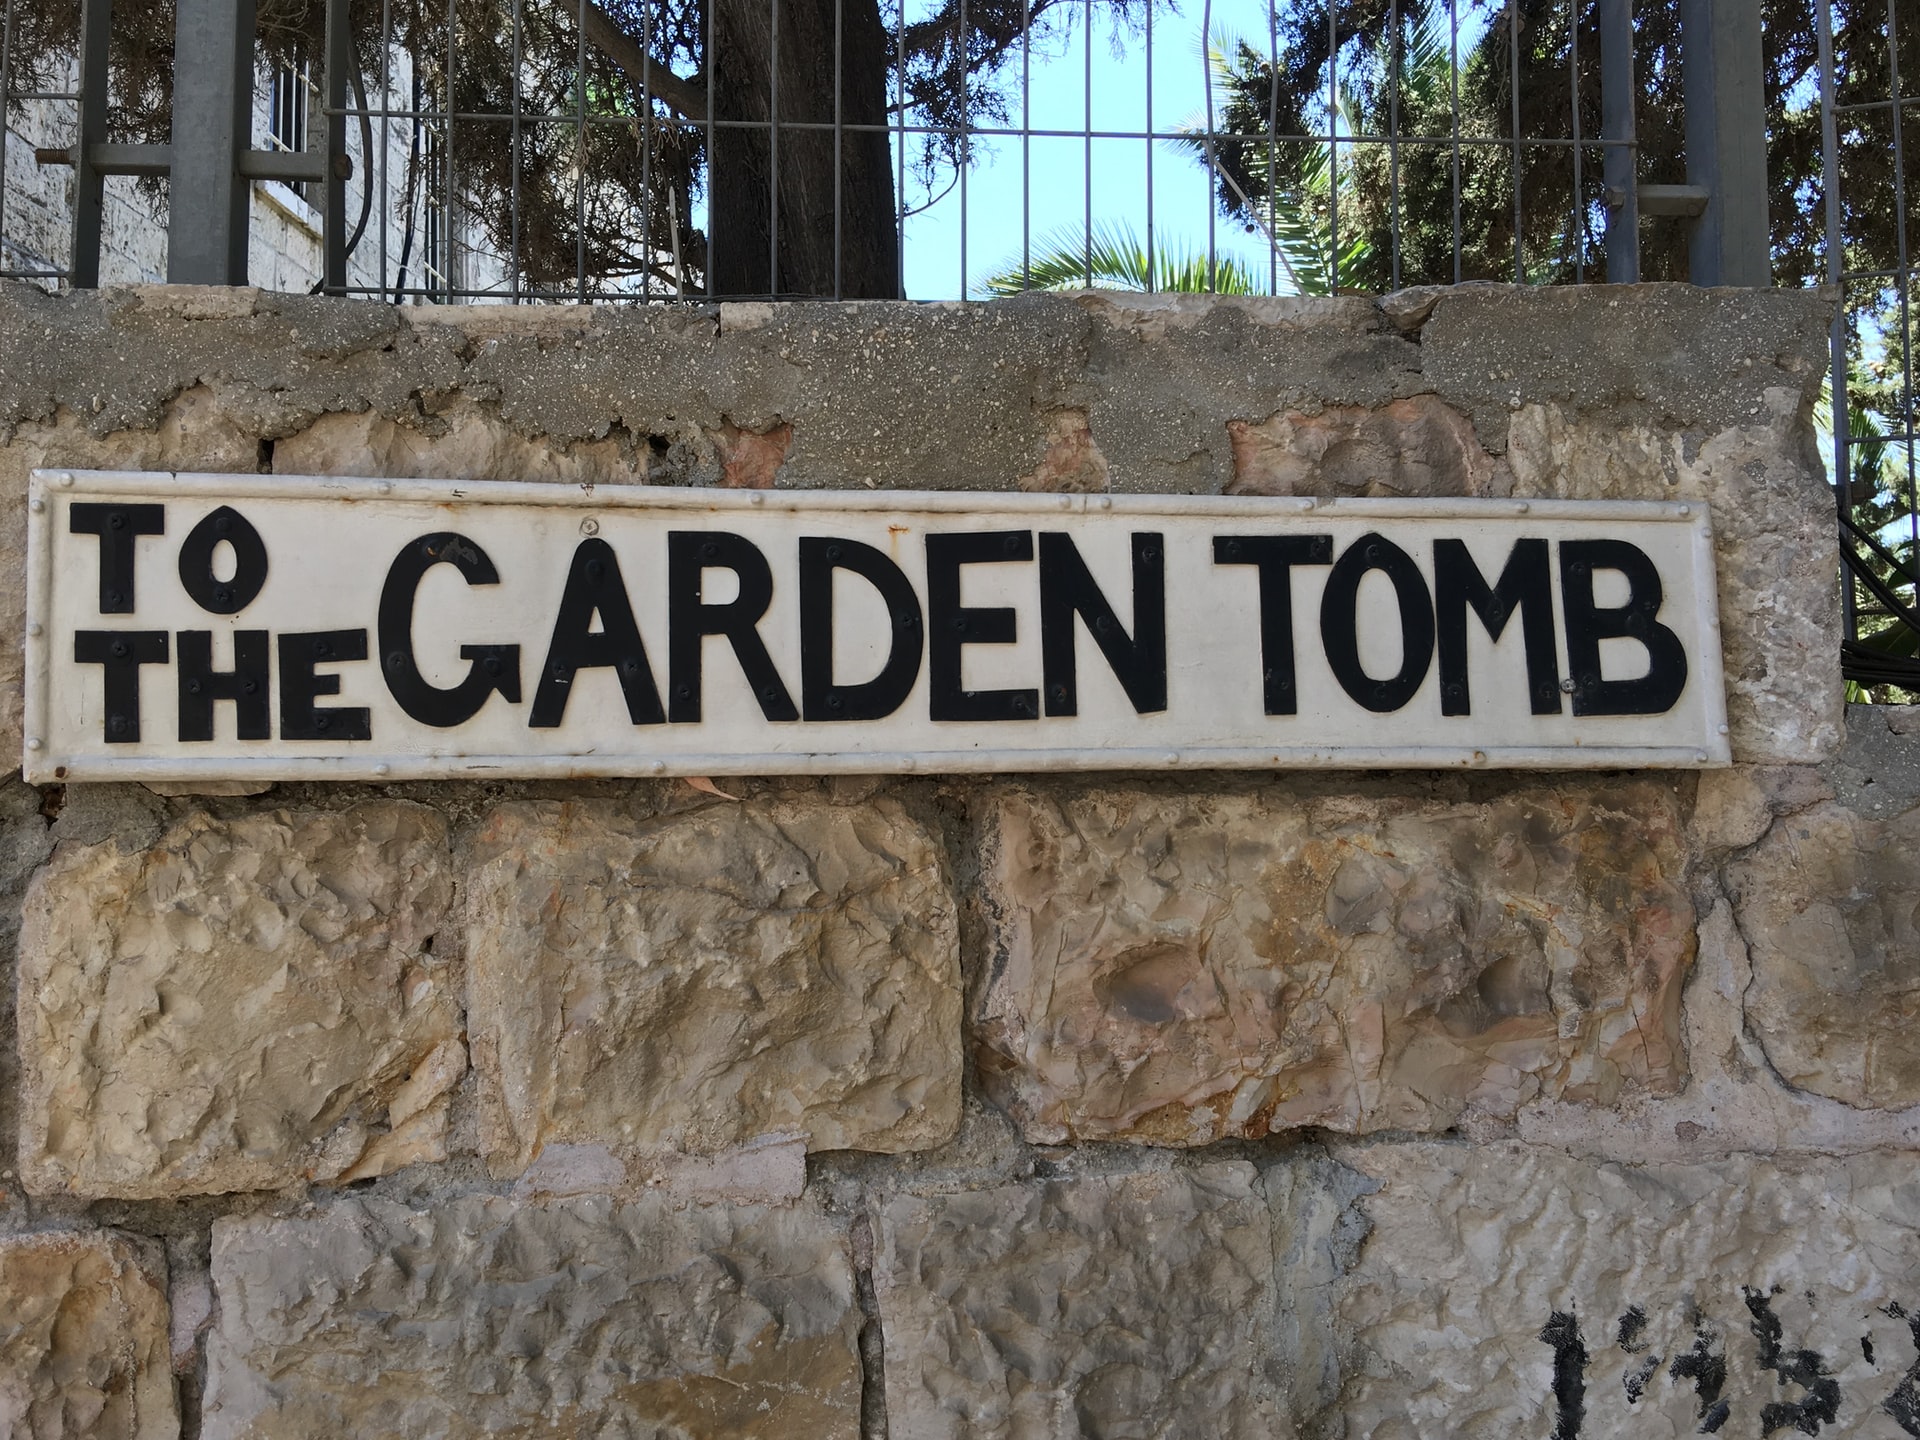 Direction sign showing the way to the Garden Tomb, Jerusalem